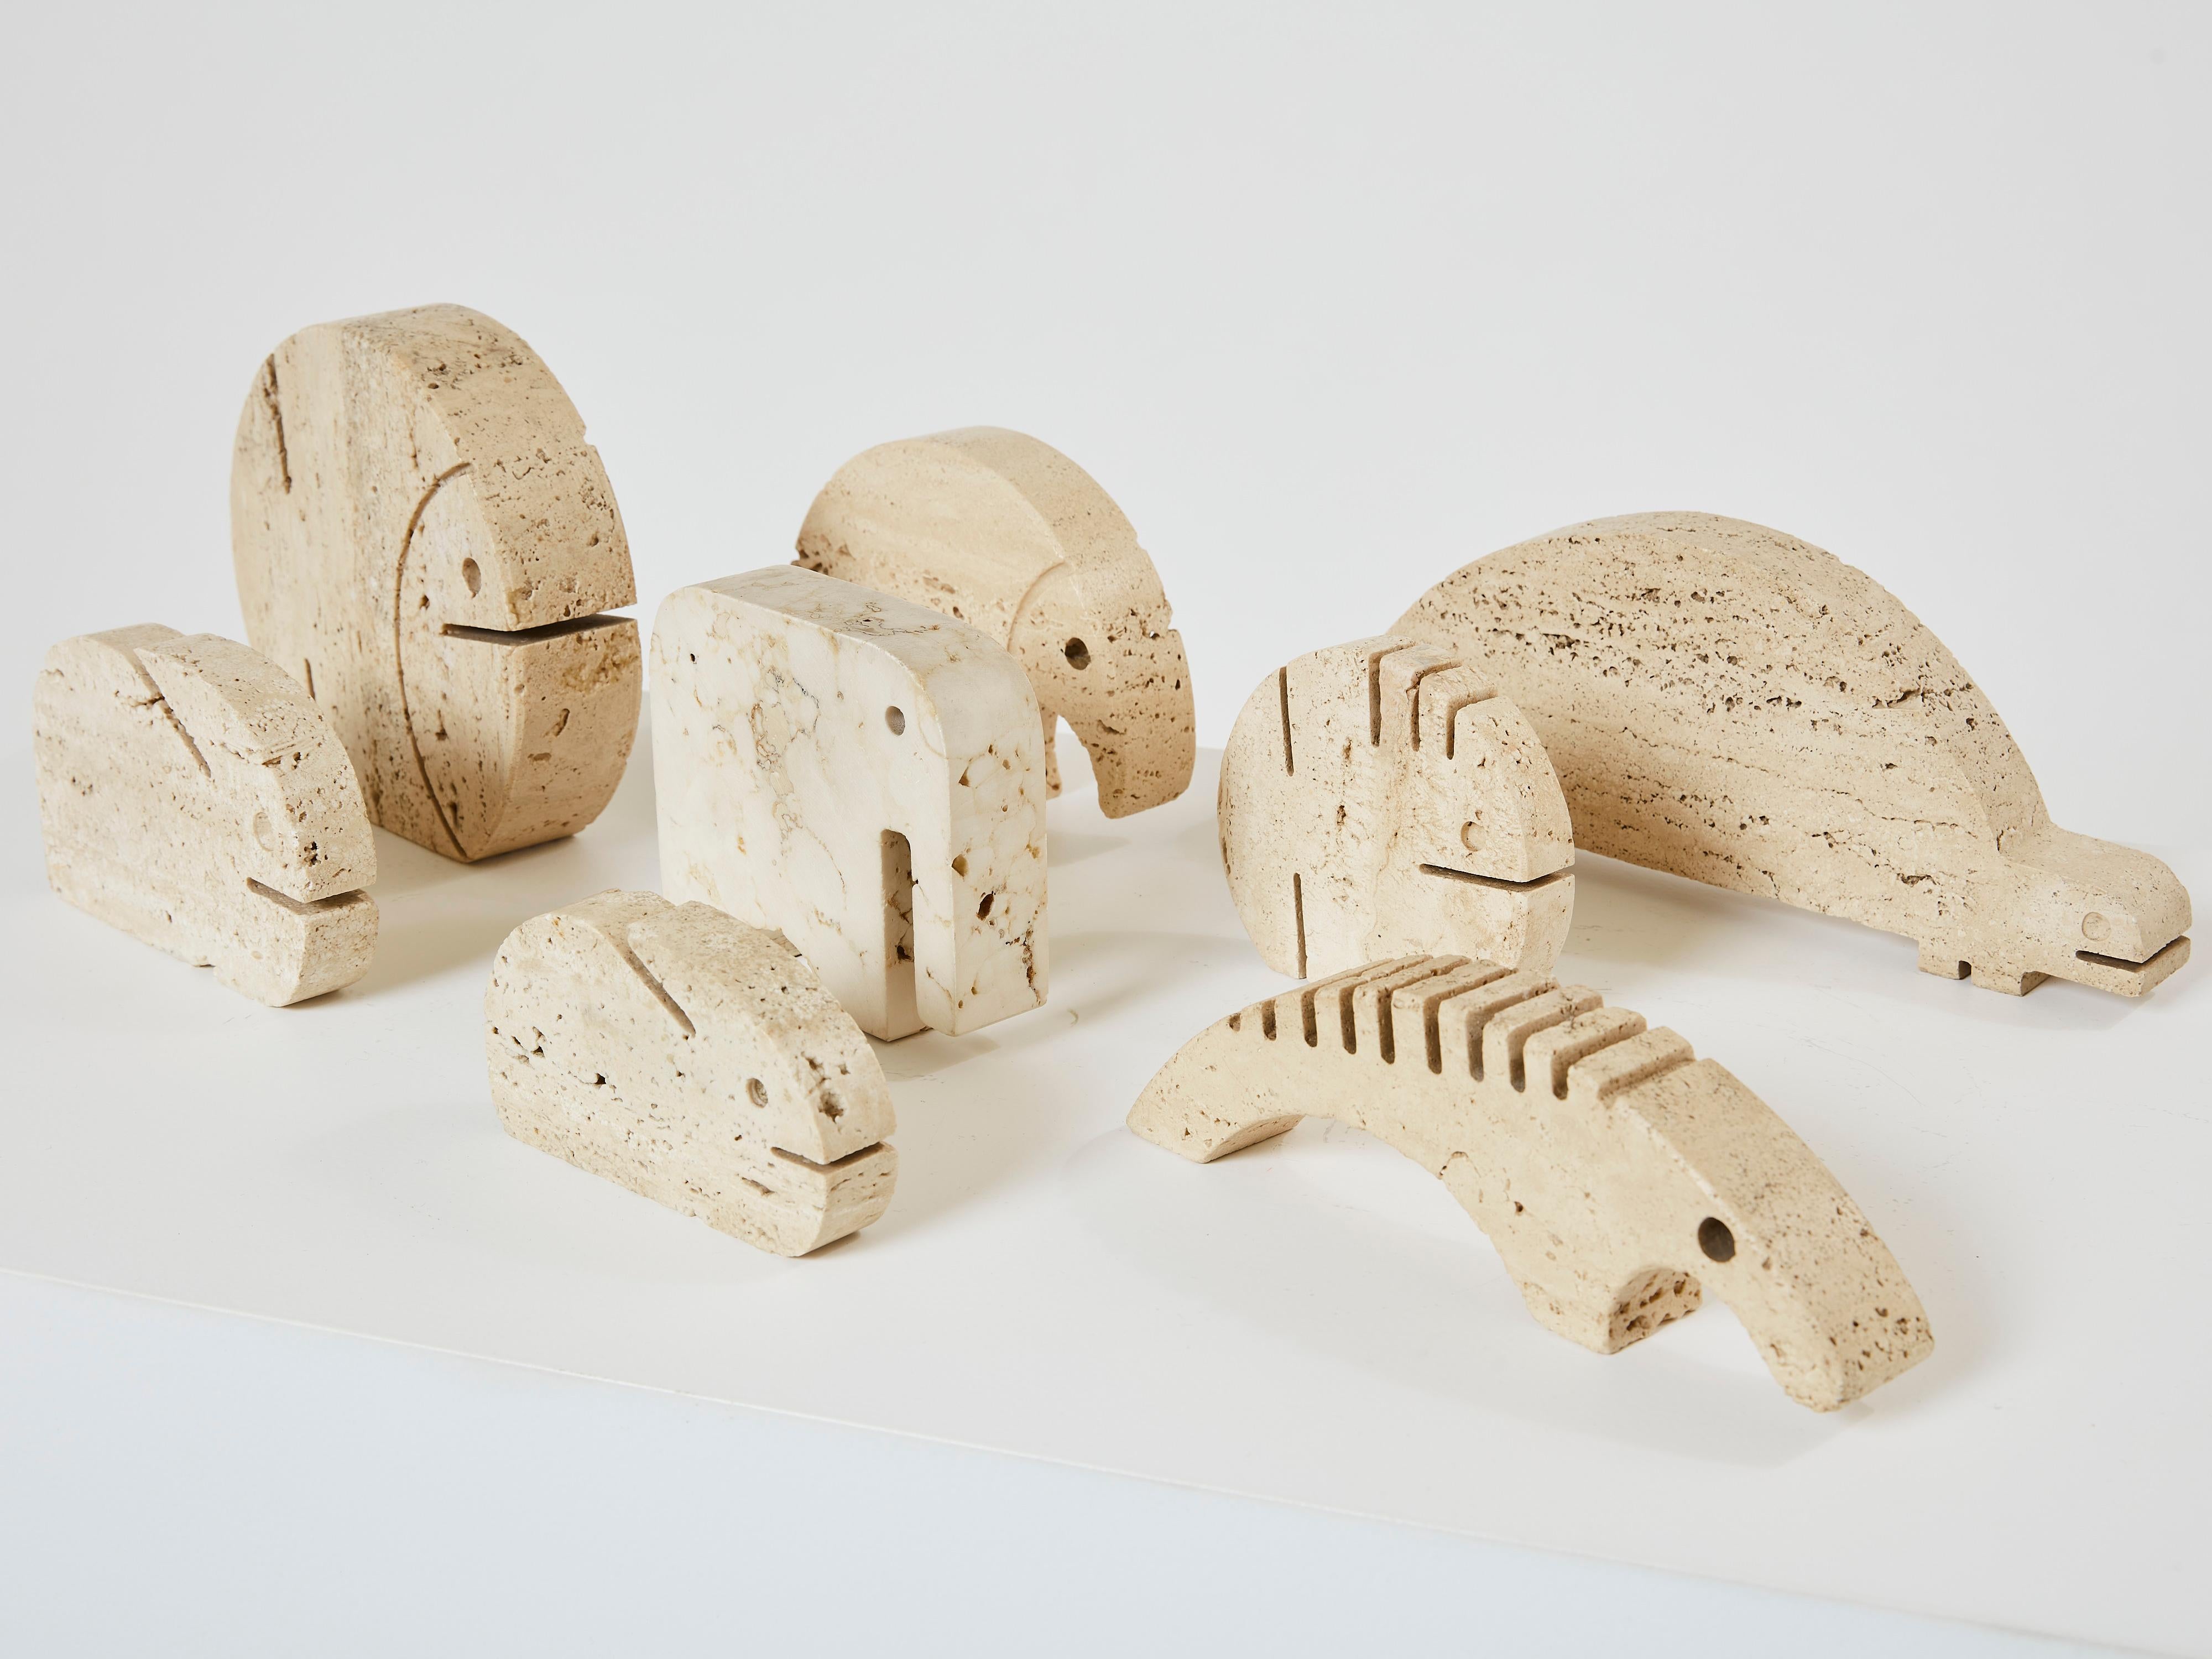 This is a very nice set of eight animal sculptures designed by Fratelli Mannelli in Italy in the early 1970s. Each animal sculpture is handmade by sculpting travertine blocks. The set includes one elephant, one fish, two rabbits, one hedgehog, one